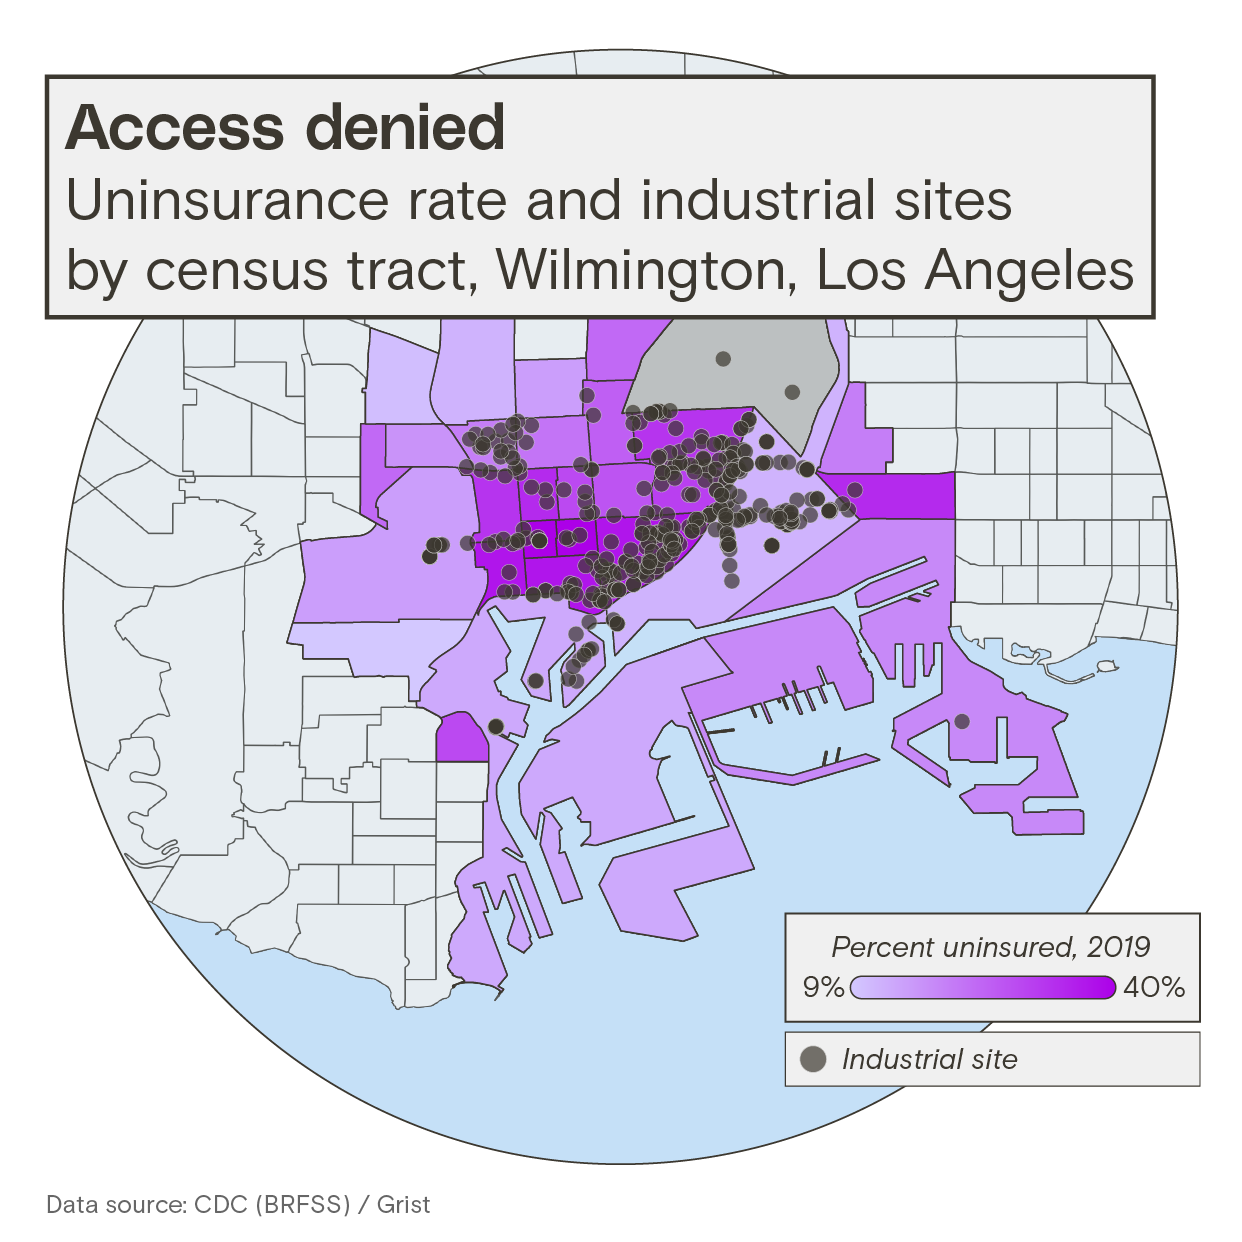 A map showing healthcare uninsurance rates and industrial sites by census tract in Wilmington, Los Angeles. Higher rates tend to occur in tracts with more industrial sites.